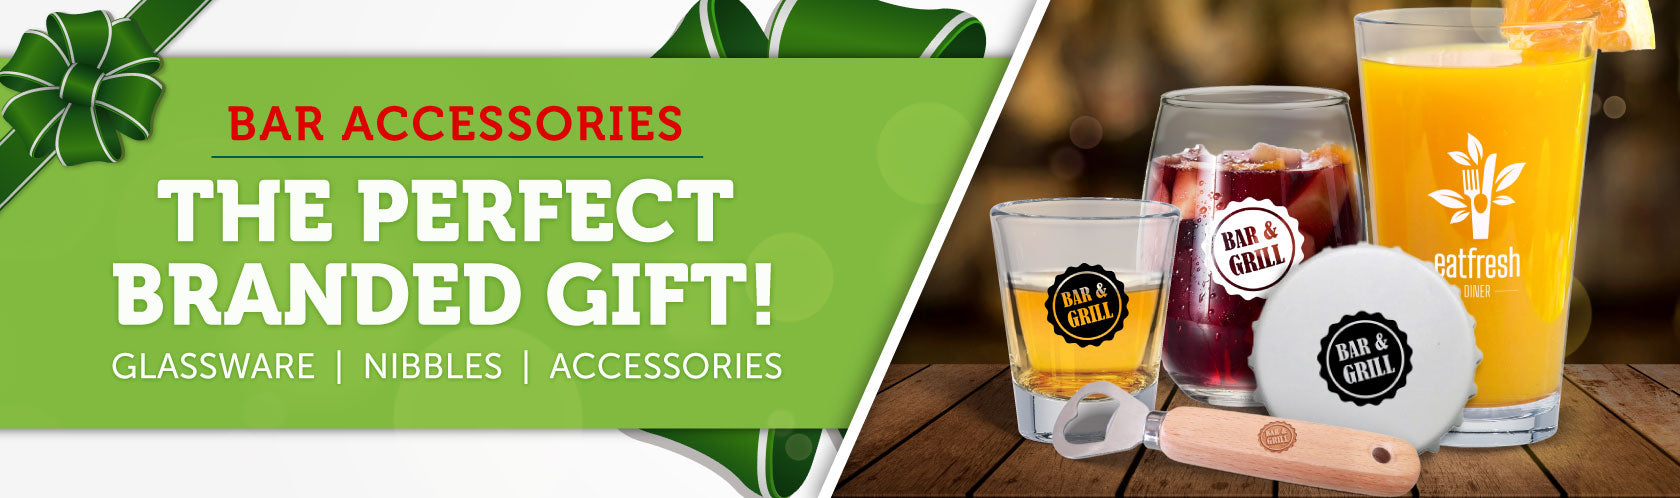 Bar Accessories: The Perfect Branded Gift!